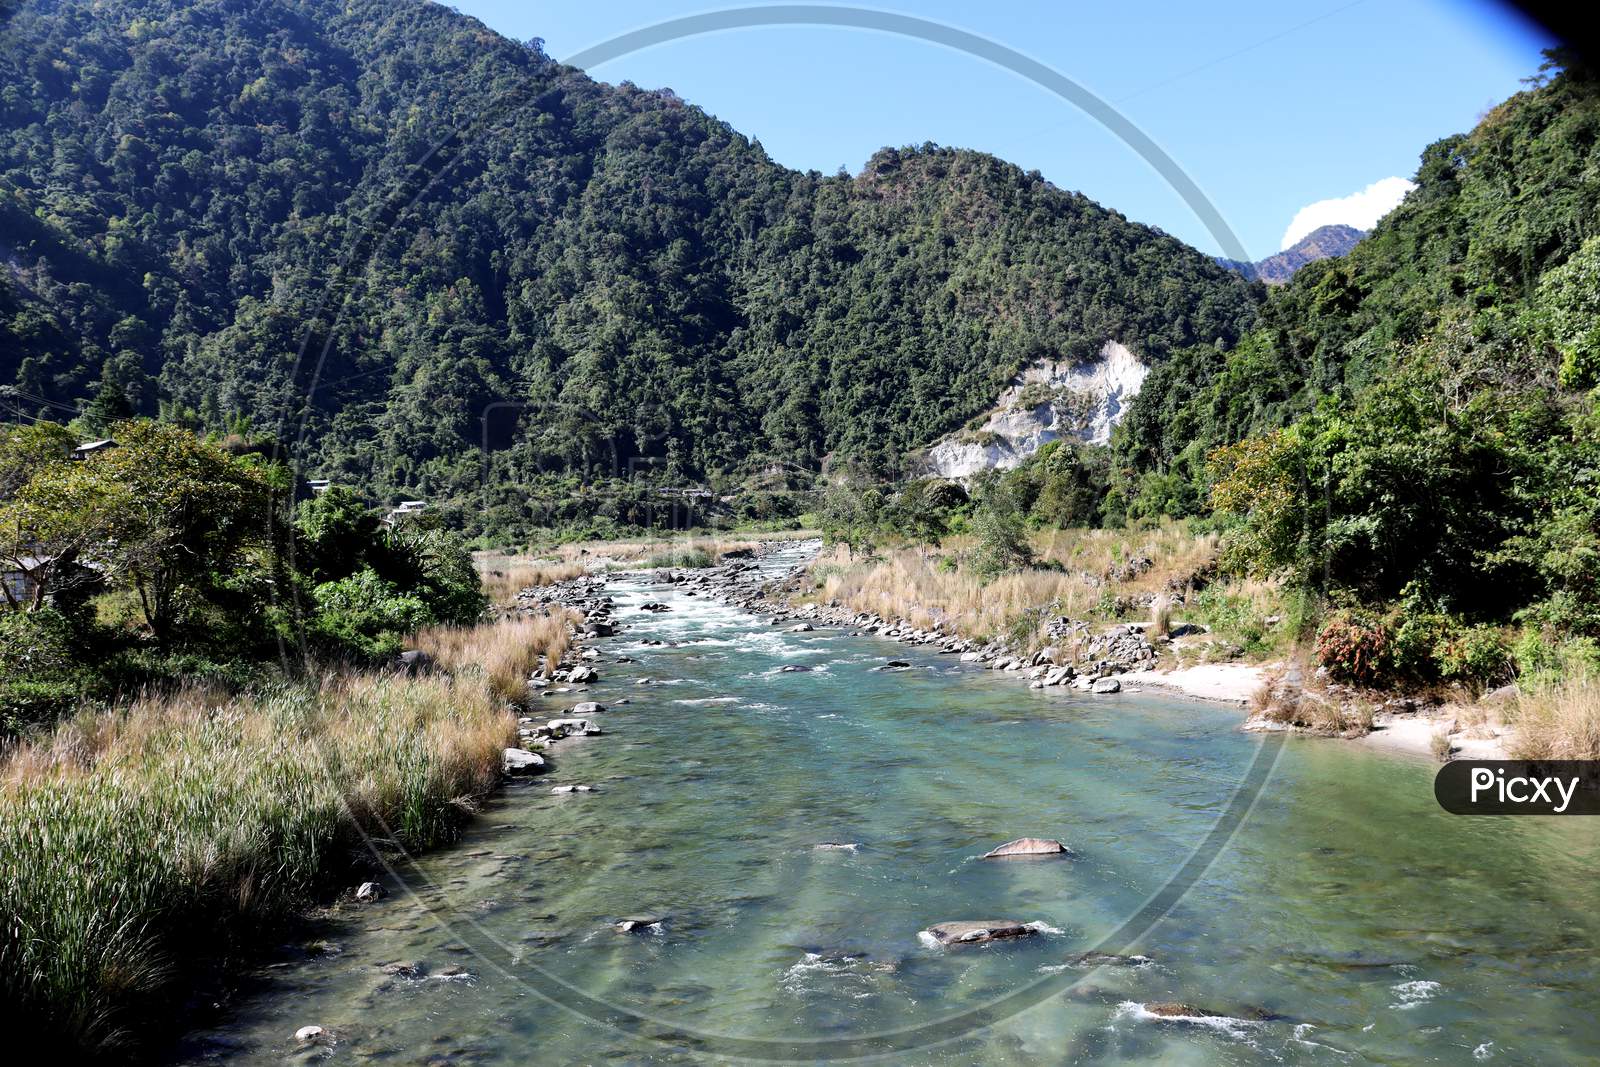 Kameng River Flowing Through Forested Valley Of Himalaya Near Bomdila, Arunachal Pradesh, India.Sunny Morning With Blue Sky.River Flow Through Rock.